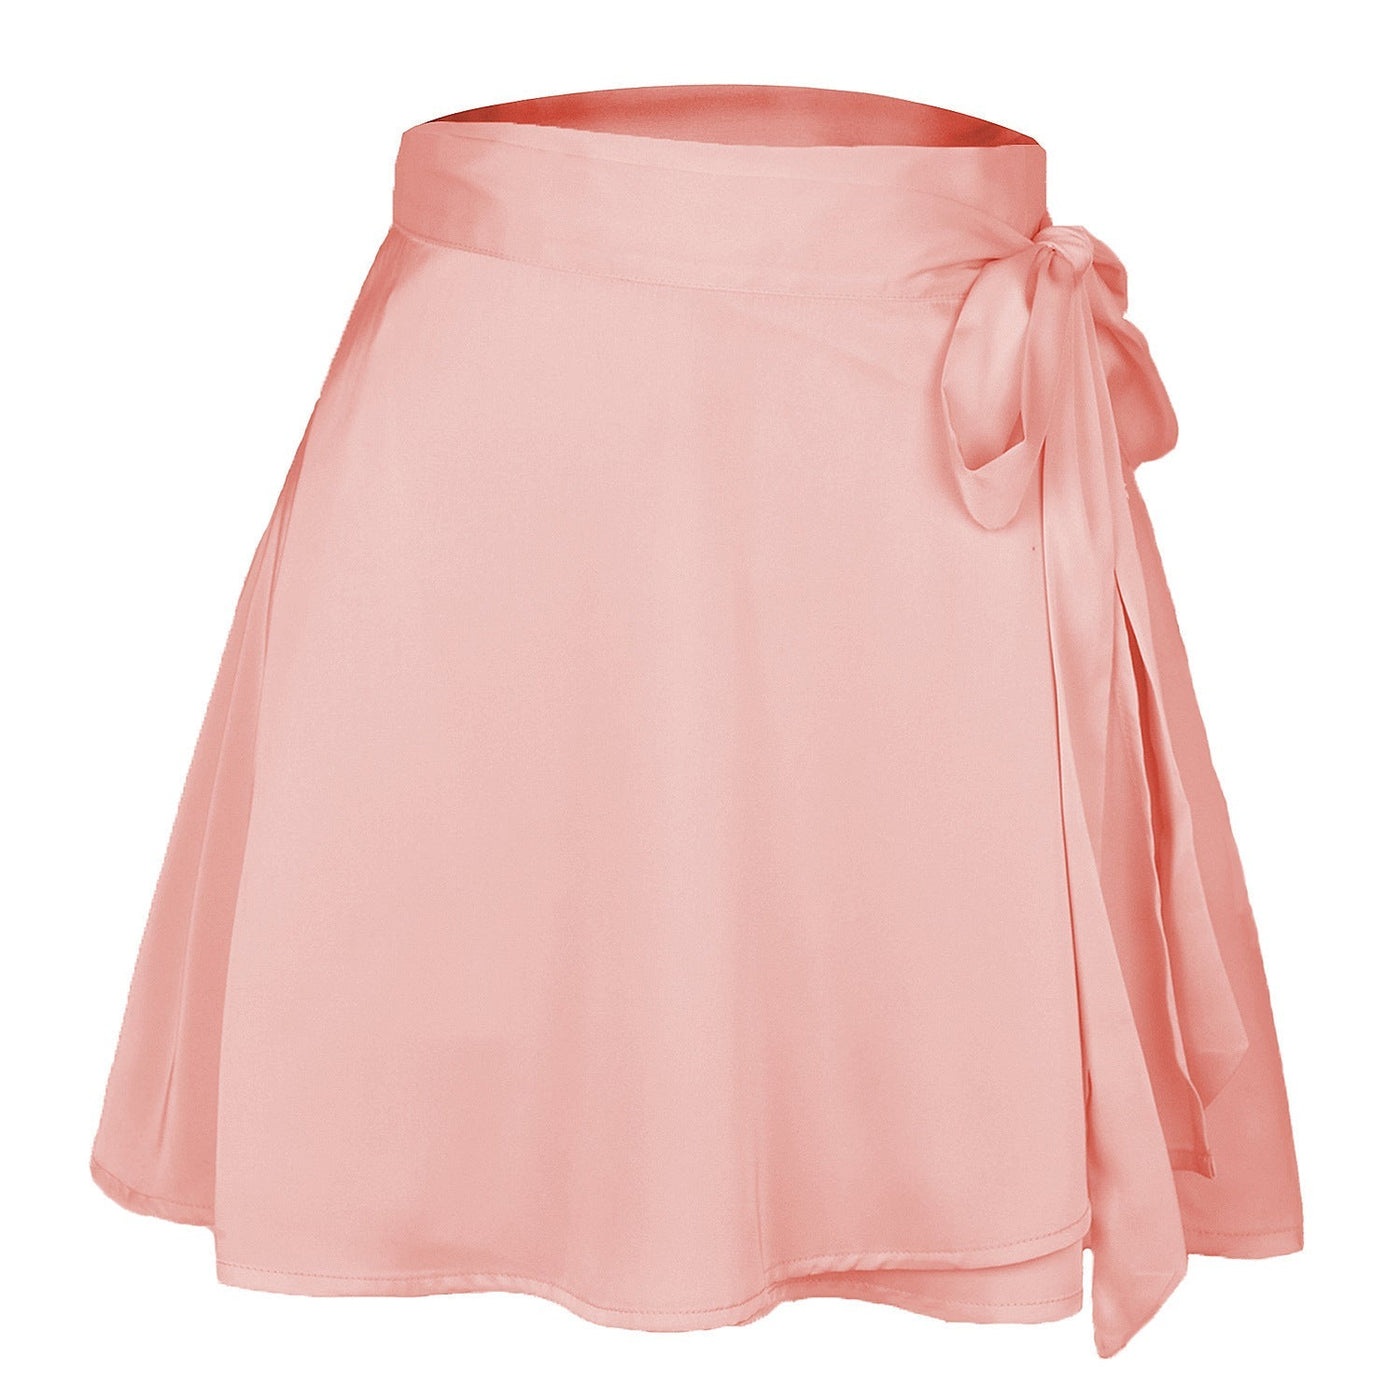 NTG Fad High Waist Lace-Up Loose Casual Chiffon Satin Mini Skirt Solid Color Elegant Skirts